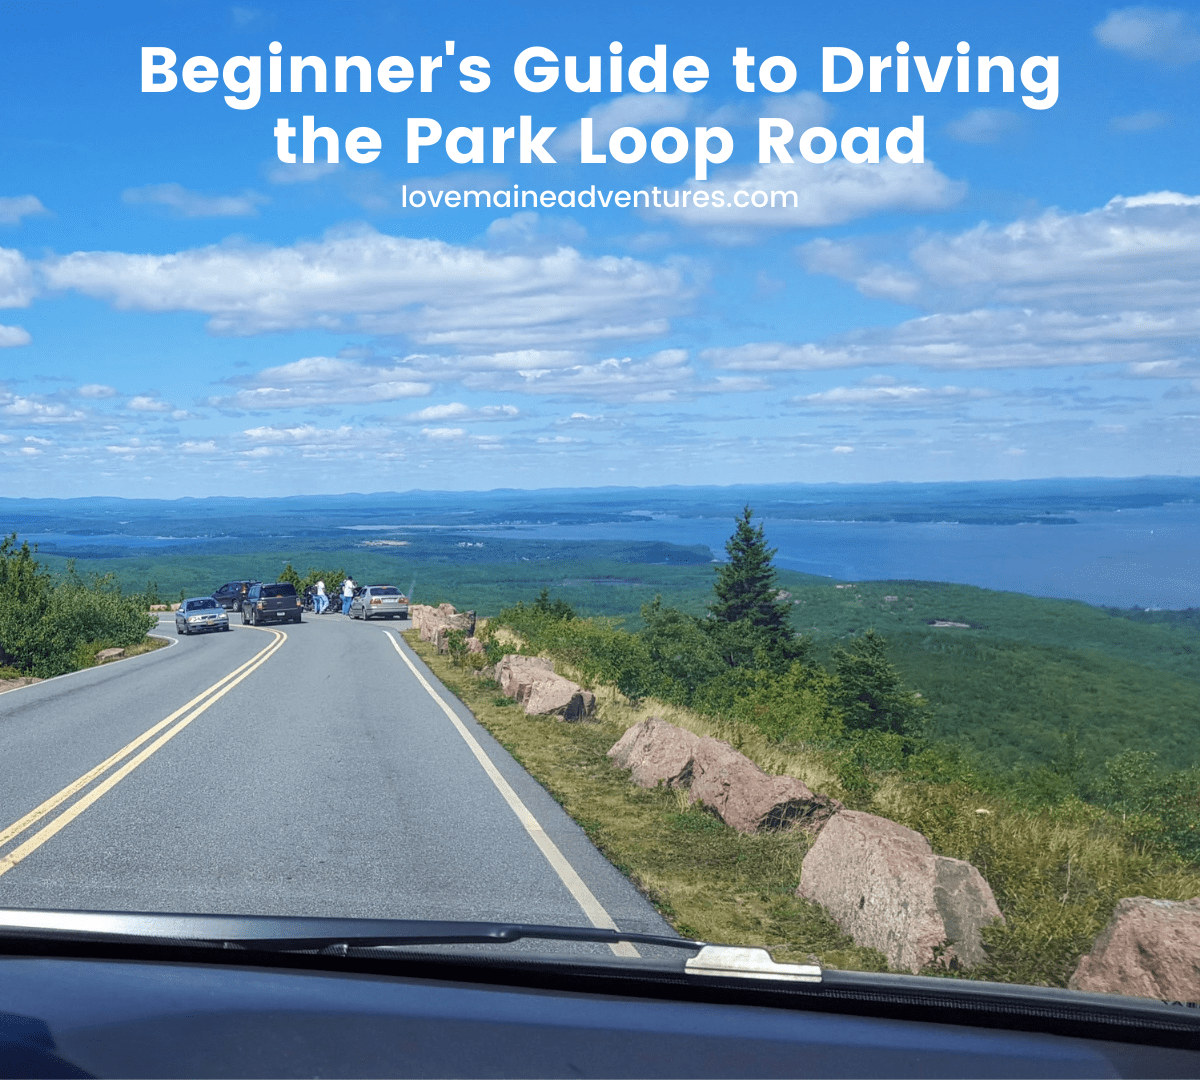 You are currently viewing Beginnner’s Guide to the Park Loop Road in Acadia National Park